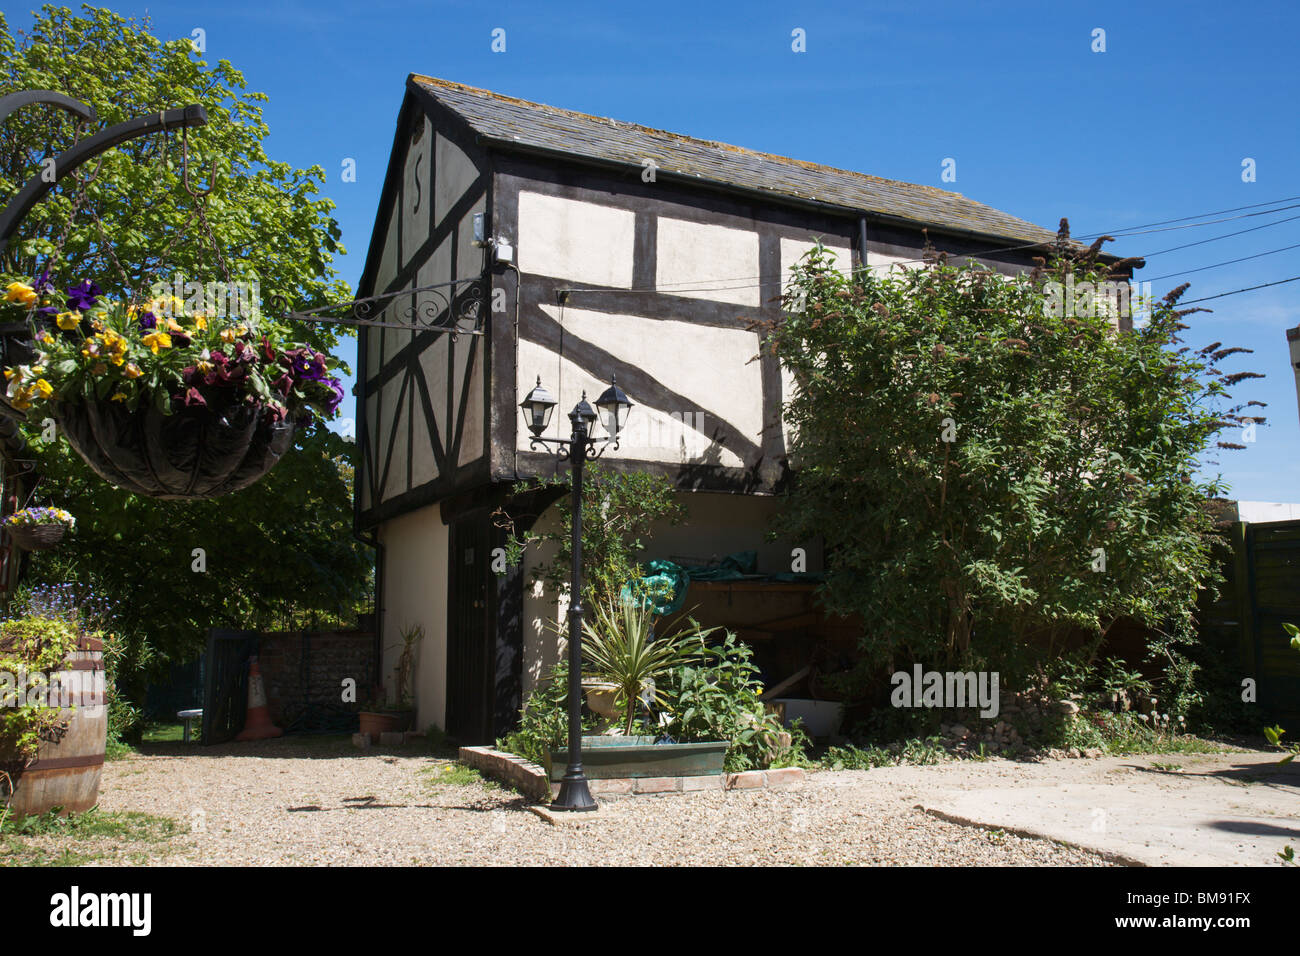 The old 'Signal Box' at 'The Hill House Inn', Happisburgh, Norfolk, England. Stock Photo